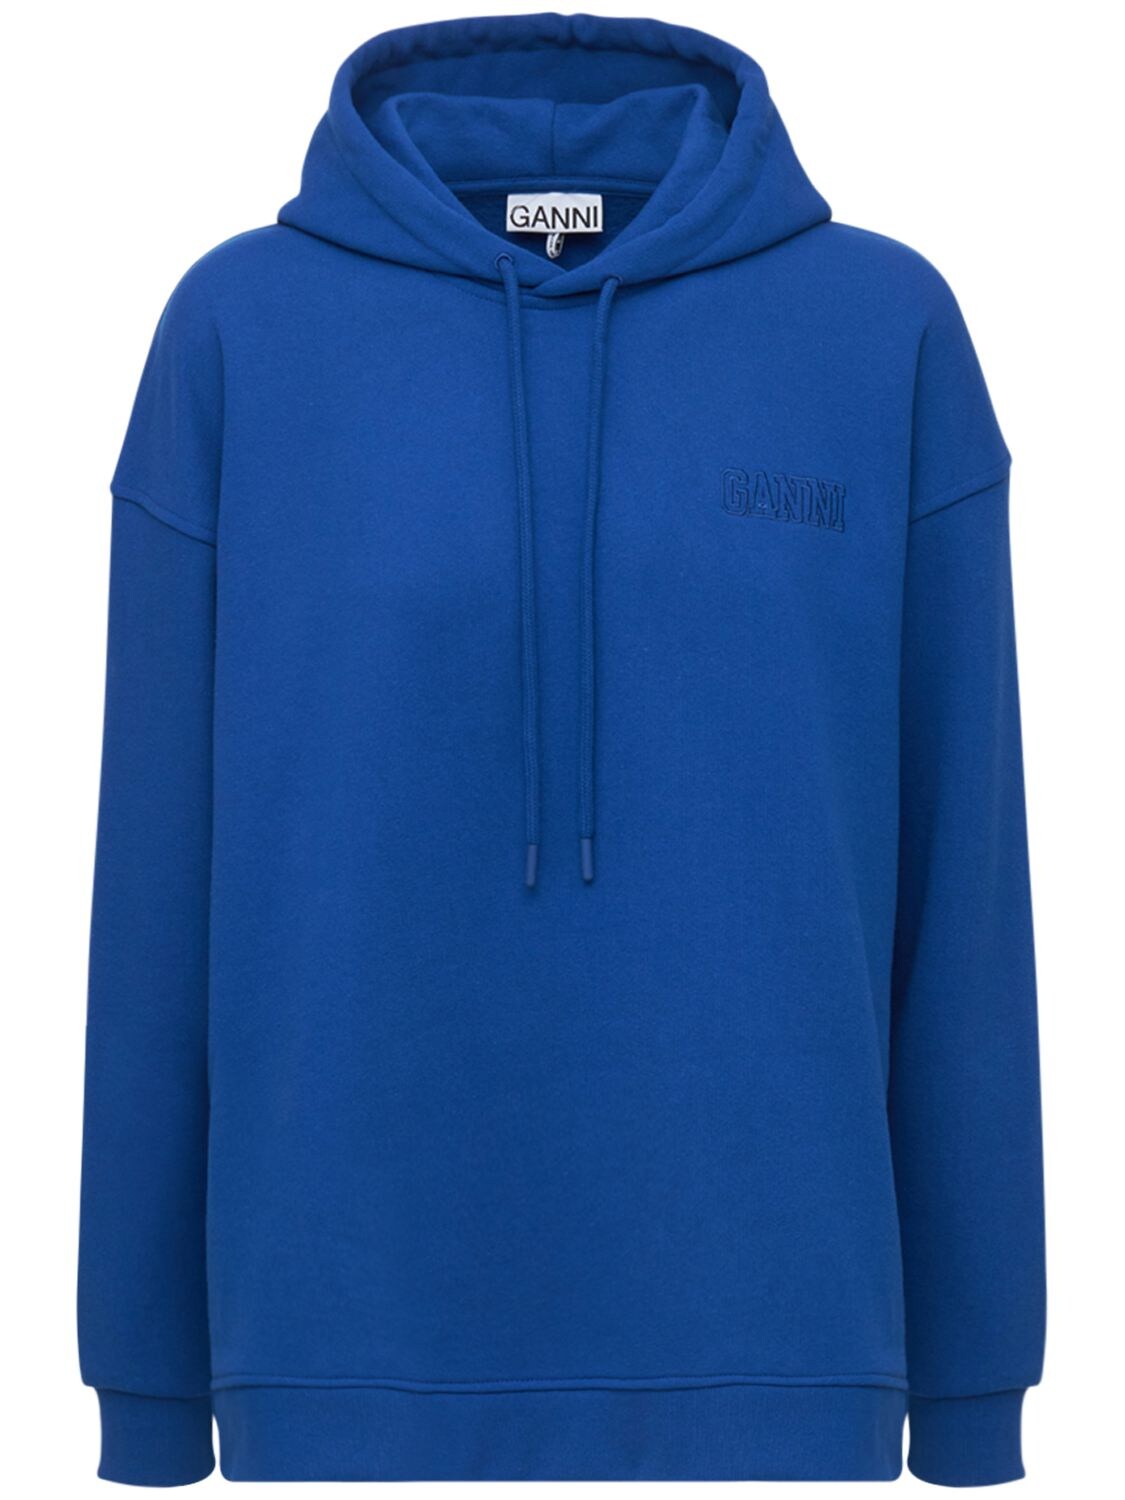 GANNI ISOLI RECYCLED COTTON BLEND HOODIE,74IY4P003-NTCY0